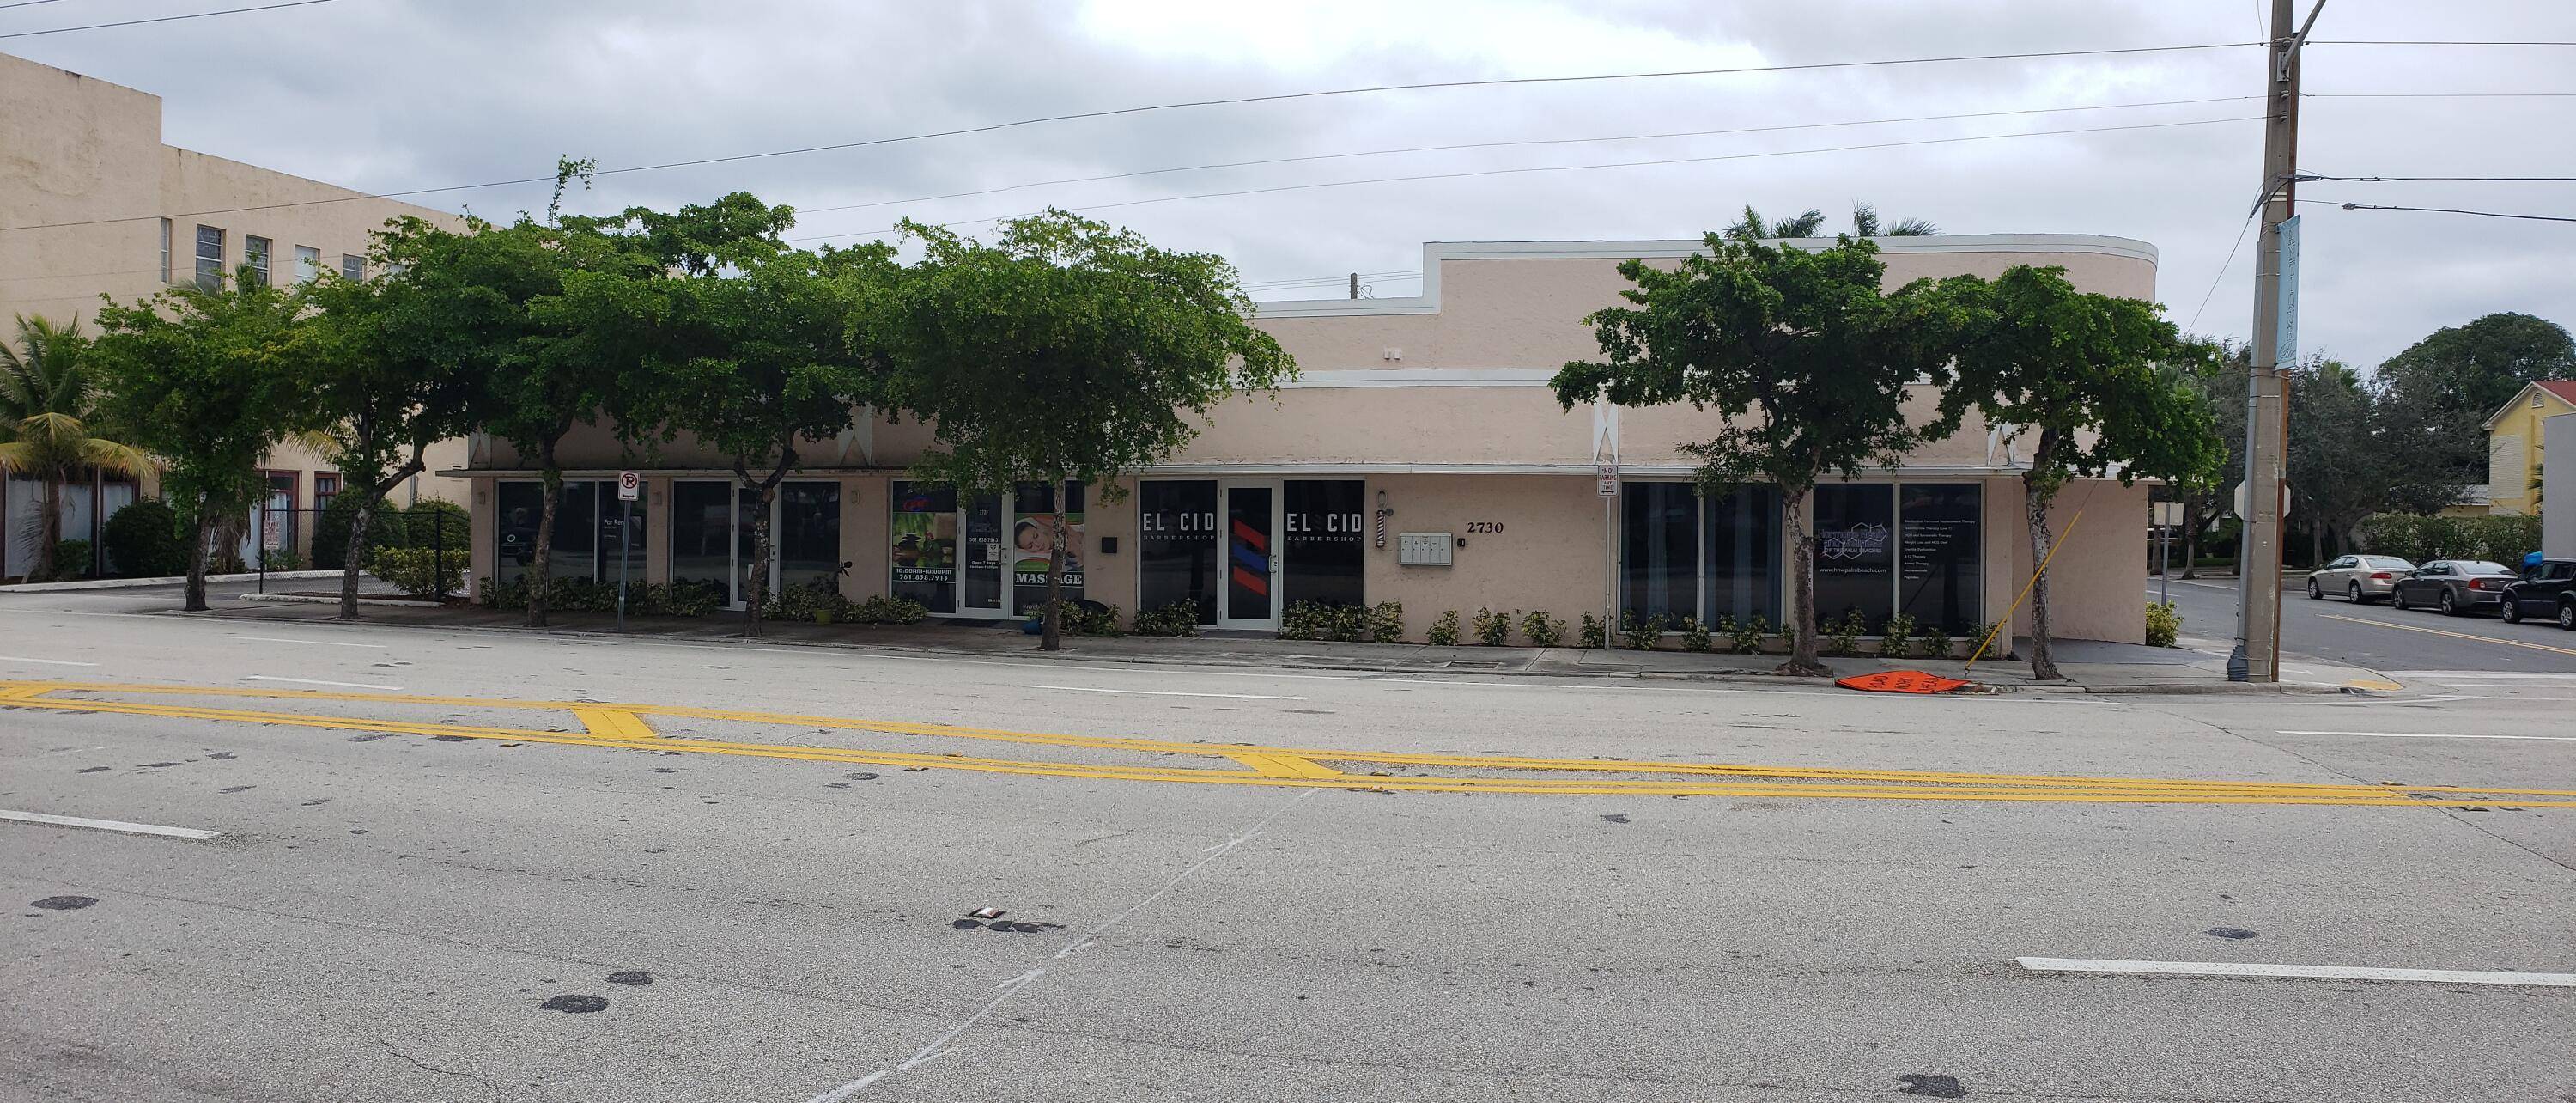 4 Unit Multi Tenant Commercial Retail Plaza with Bonus Residential Apartment upstairs.